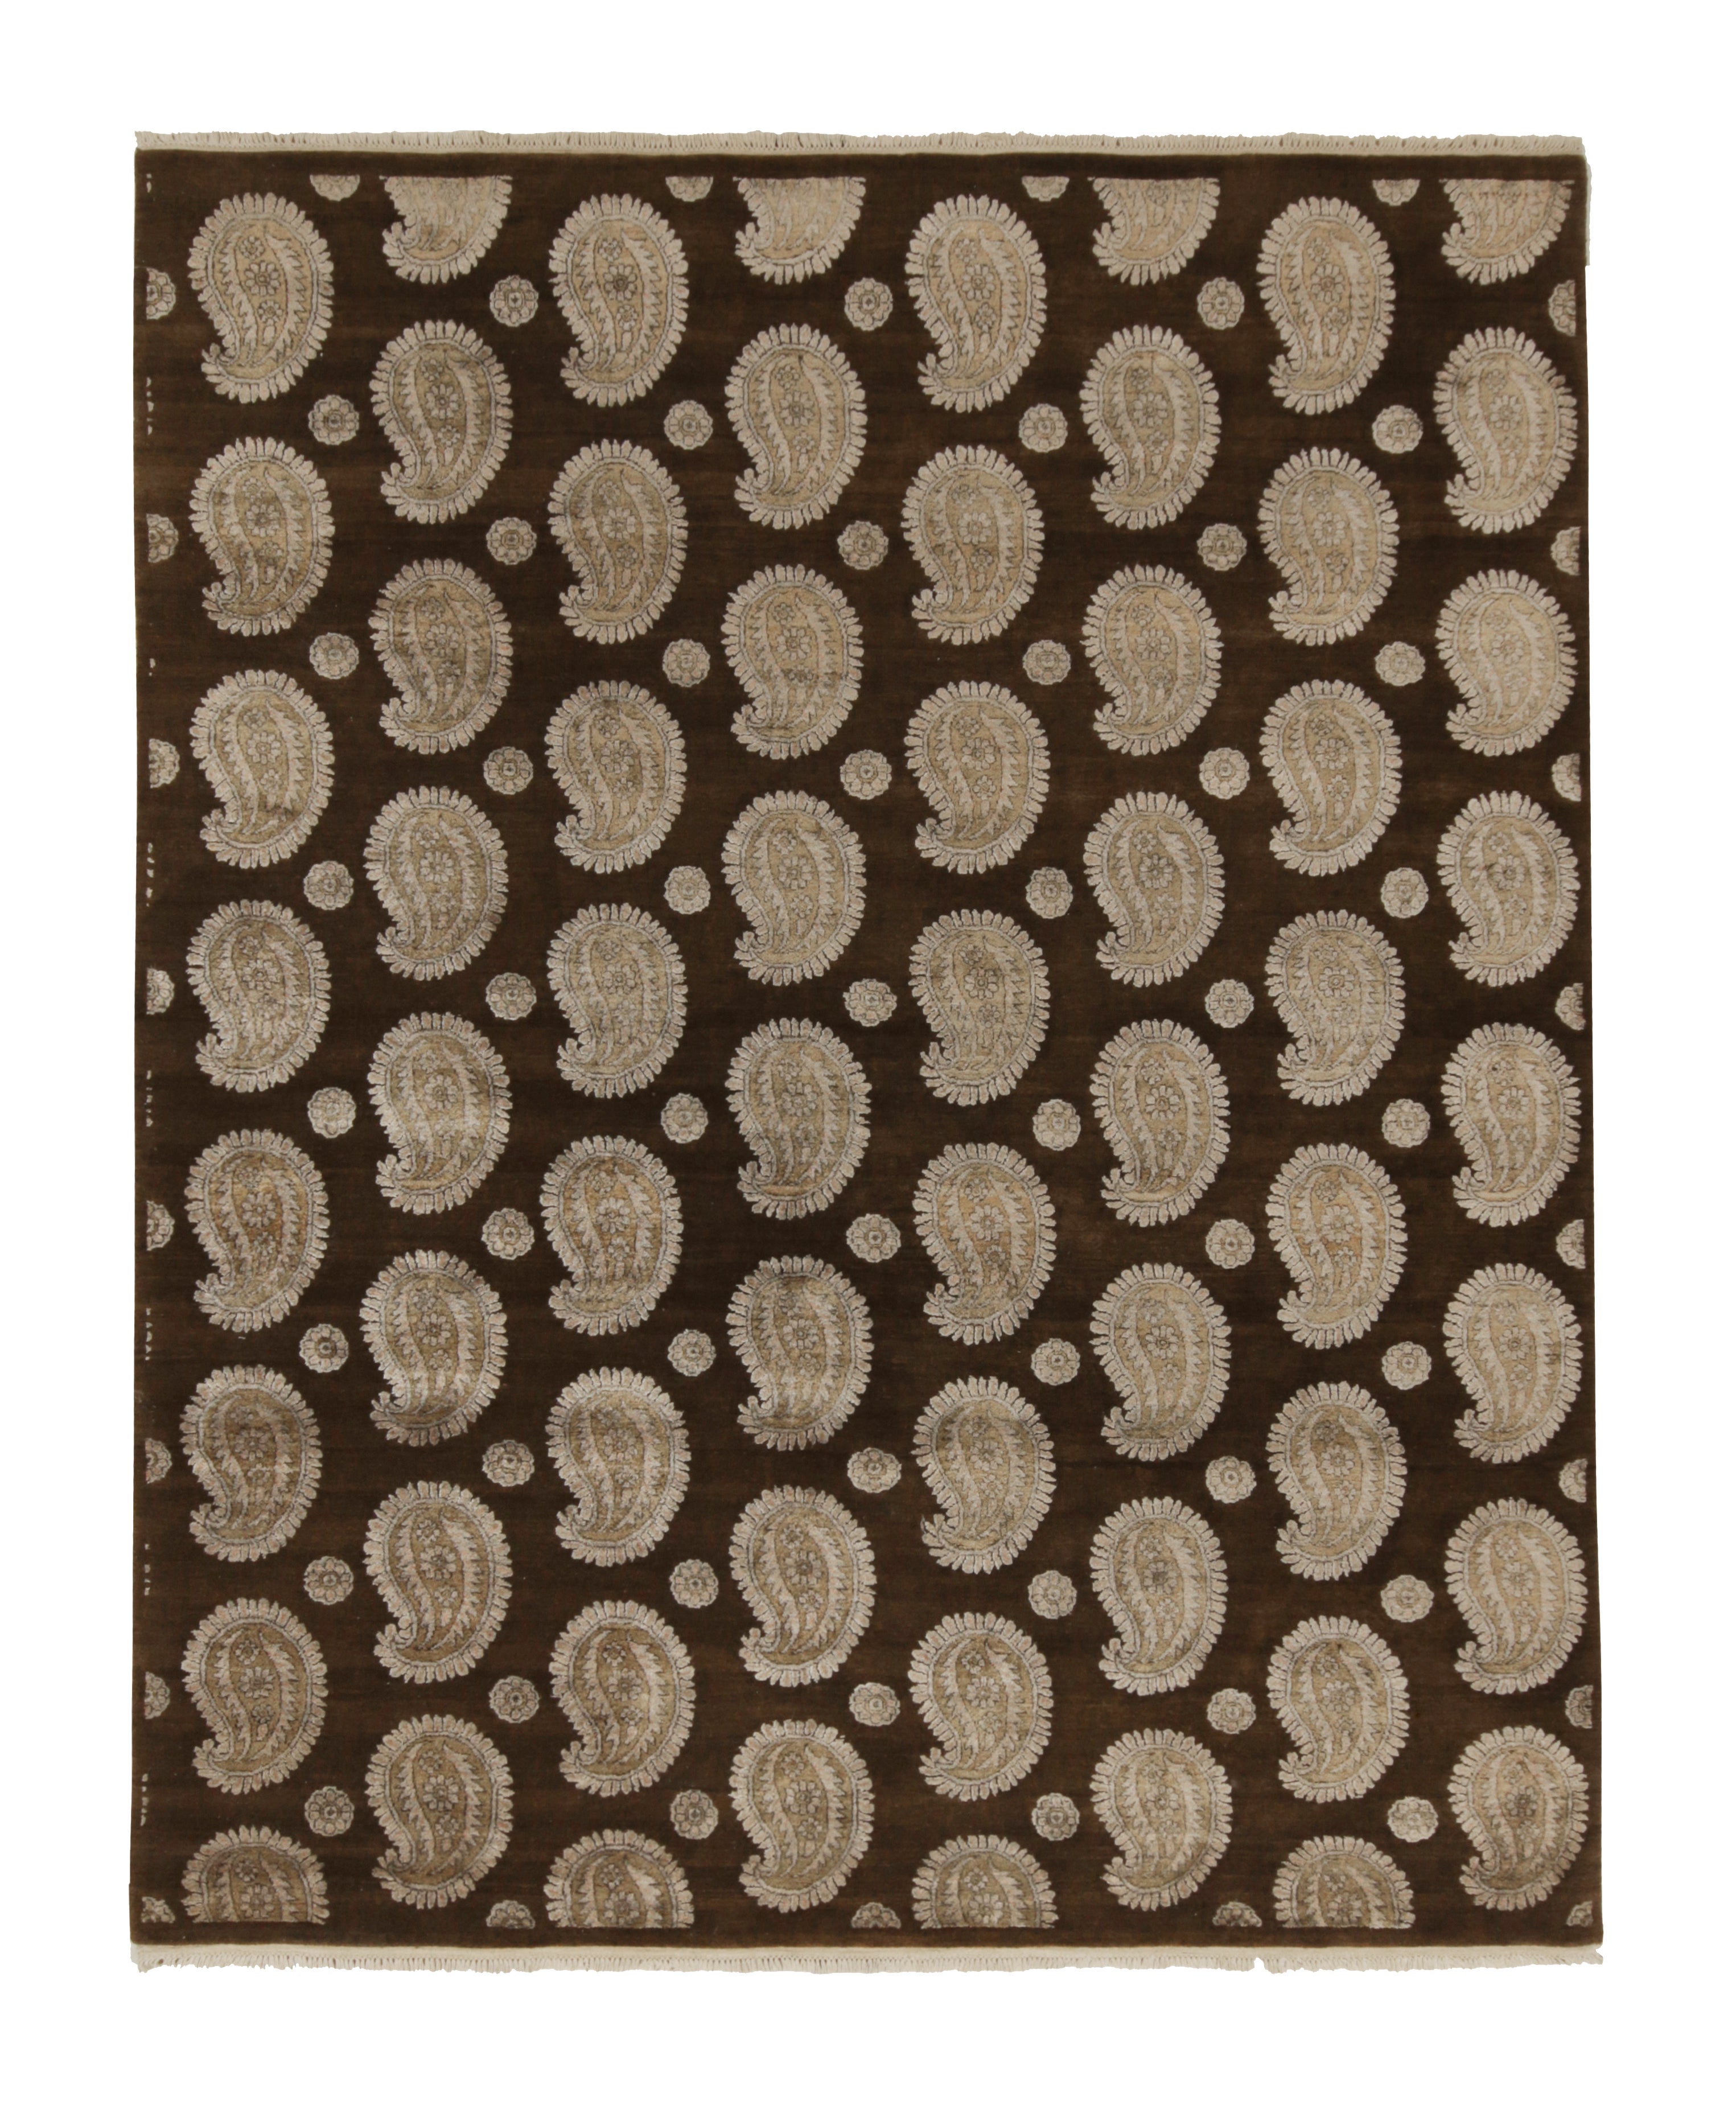 Rug & Kilim’s Classic Style Rug in Brown with Ivory Paisley Patterns For Sale